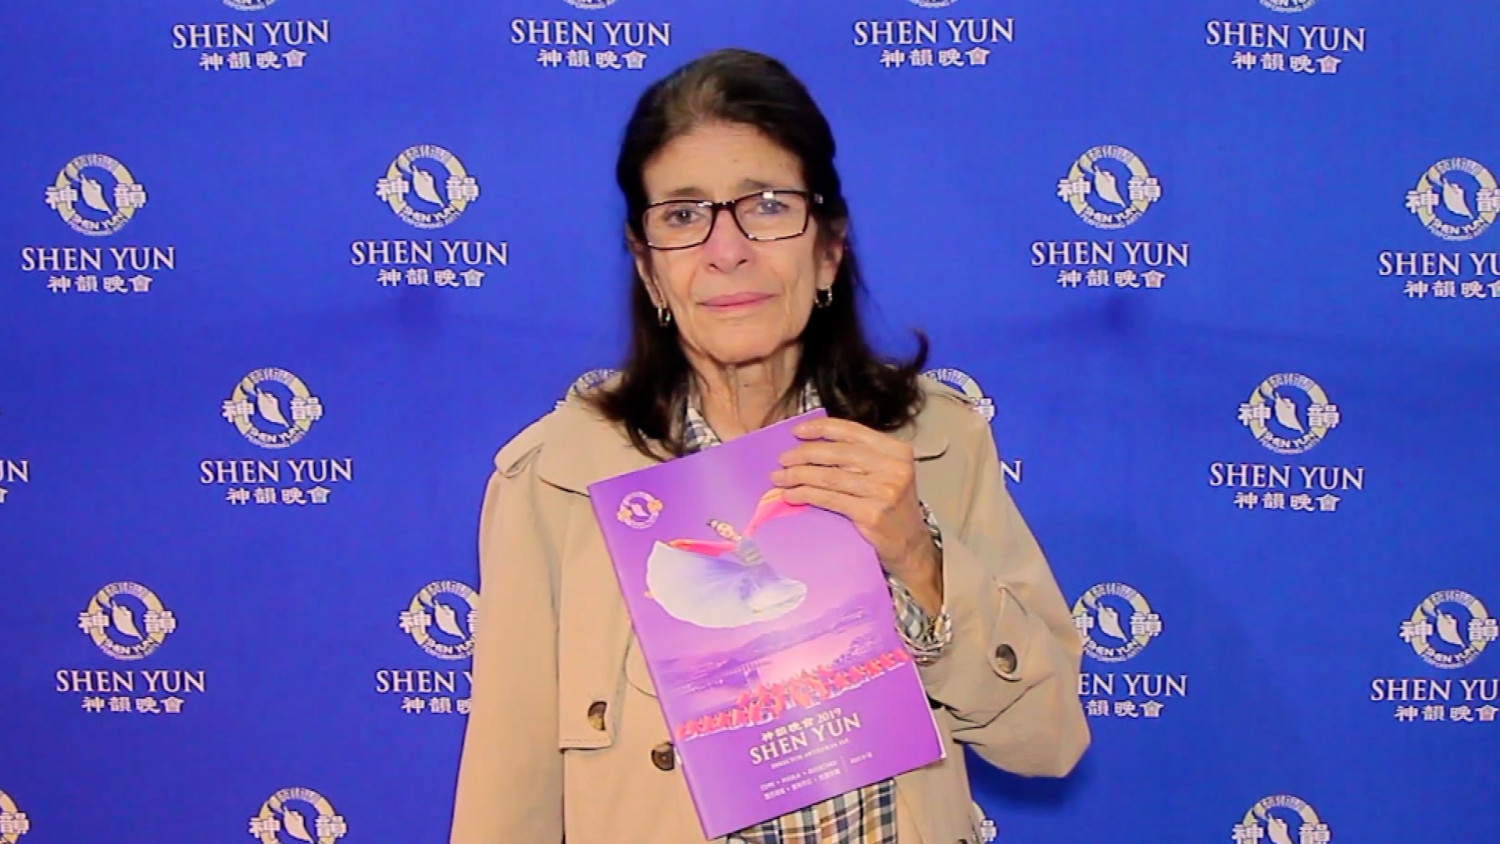 Shen Yun’s Perfection ‘Is Really Overwhelming’: Mexican Actress Moved to Tears